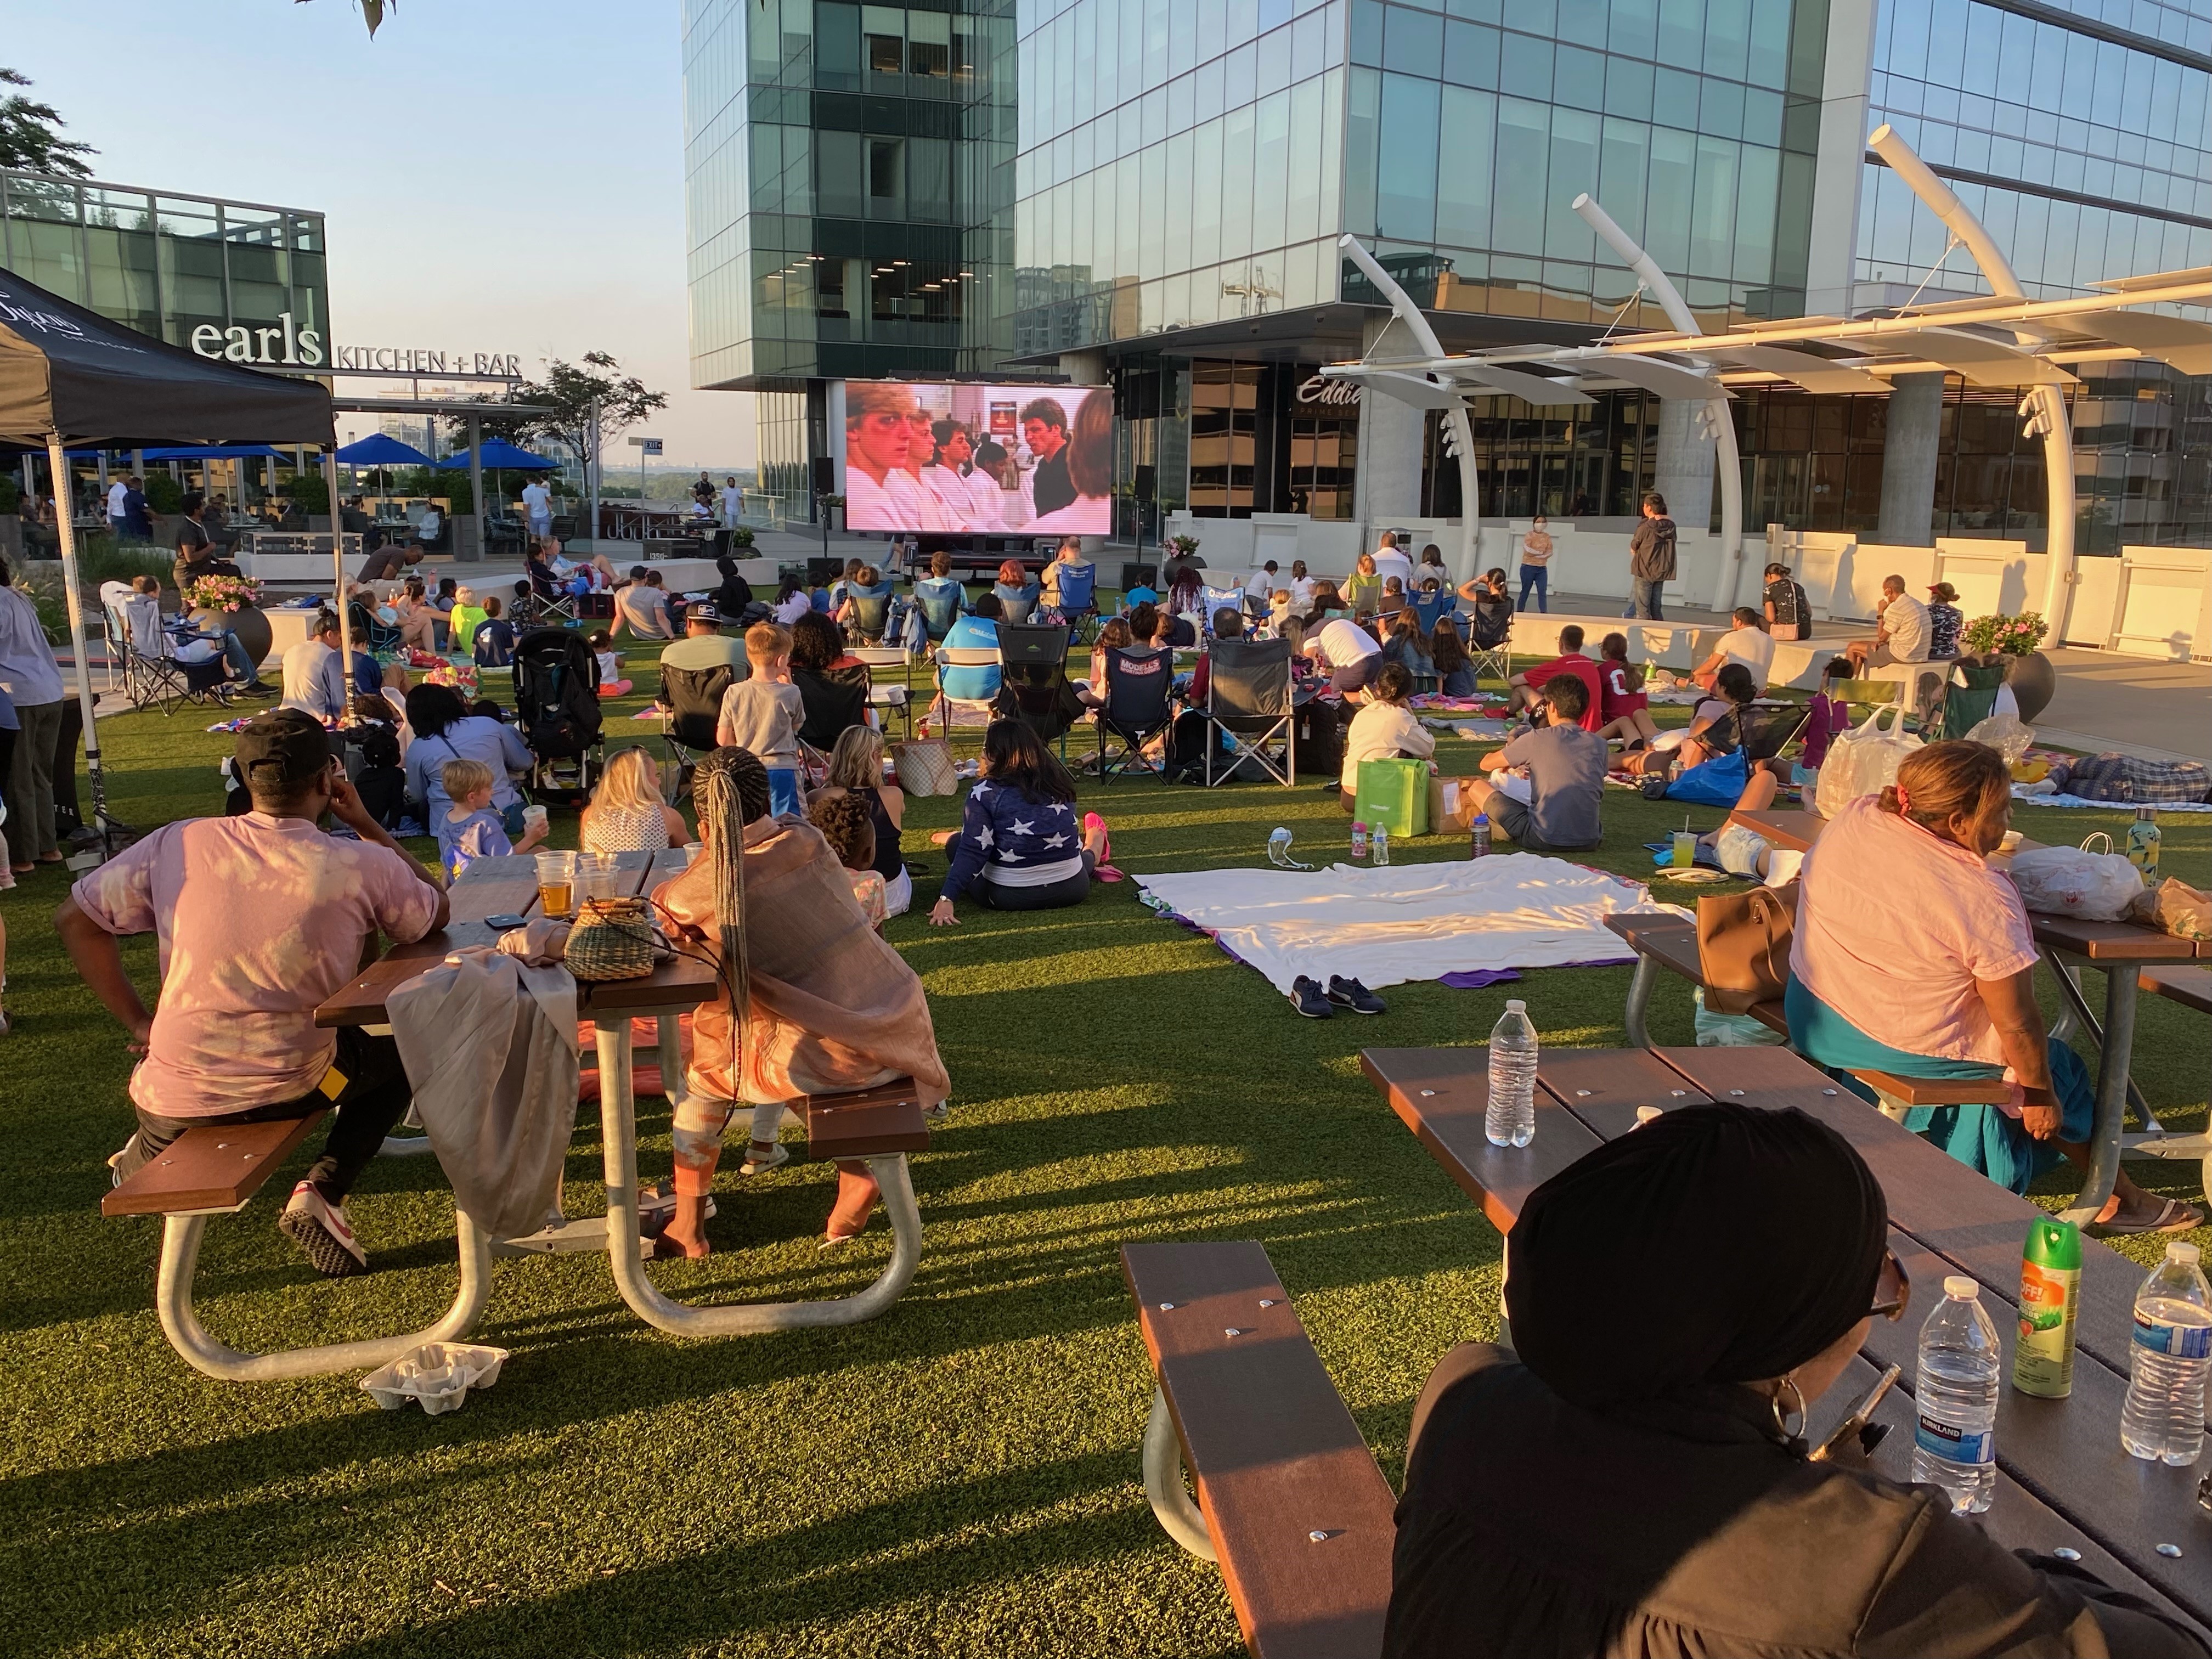 groups of families and friends spread out on the lawn watching a movie on a large screen. 